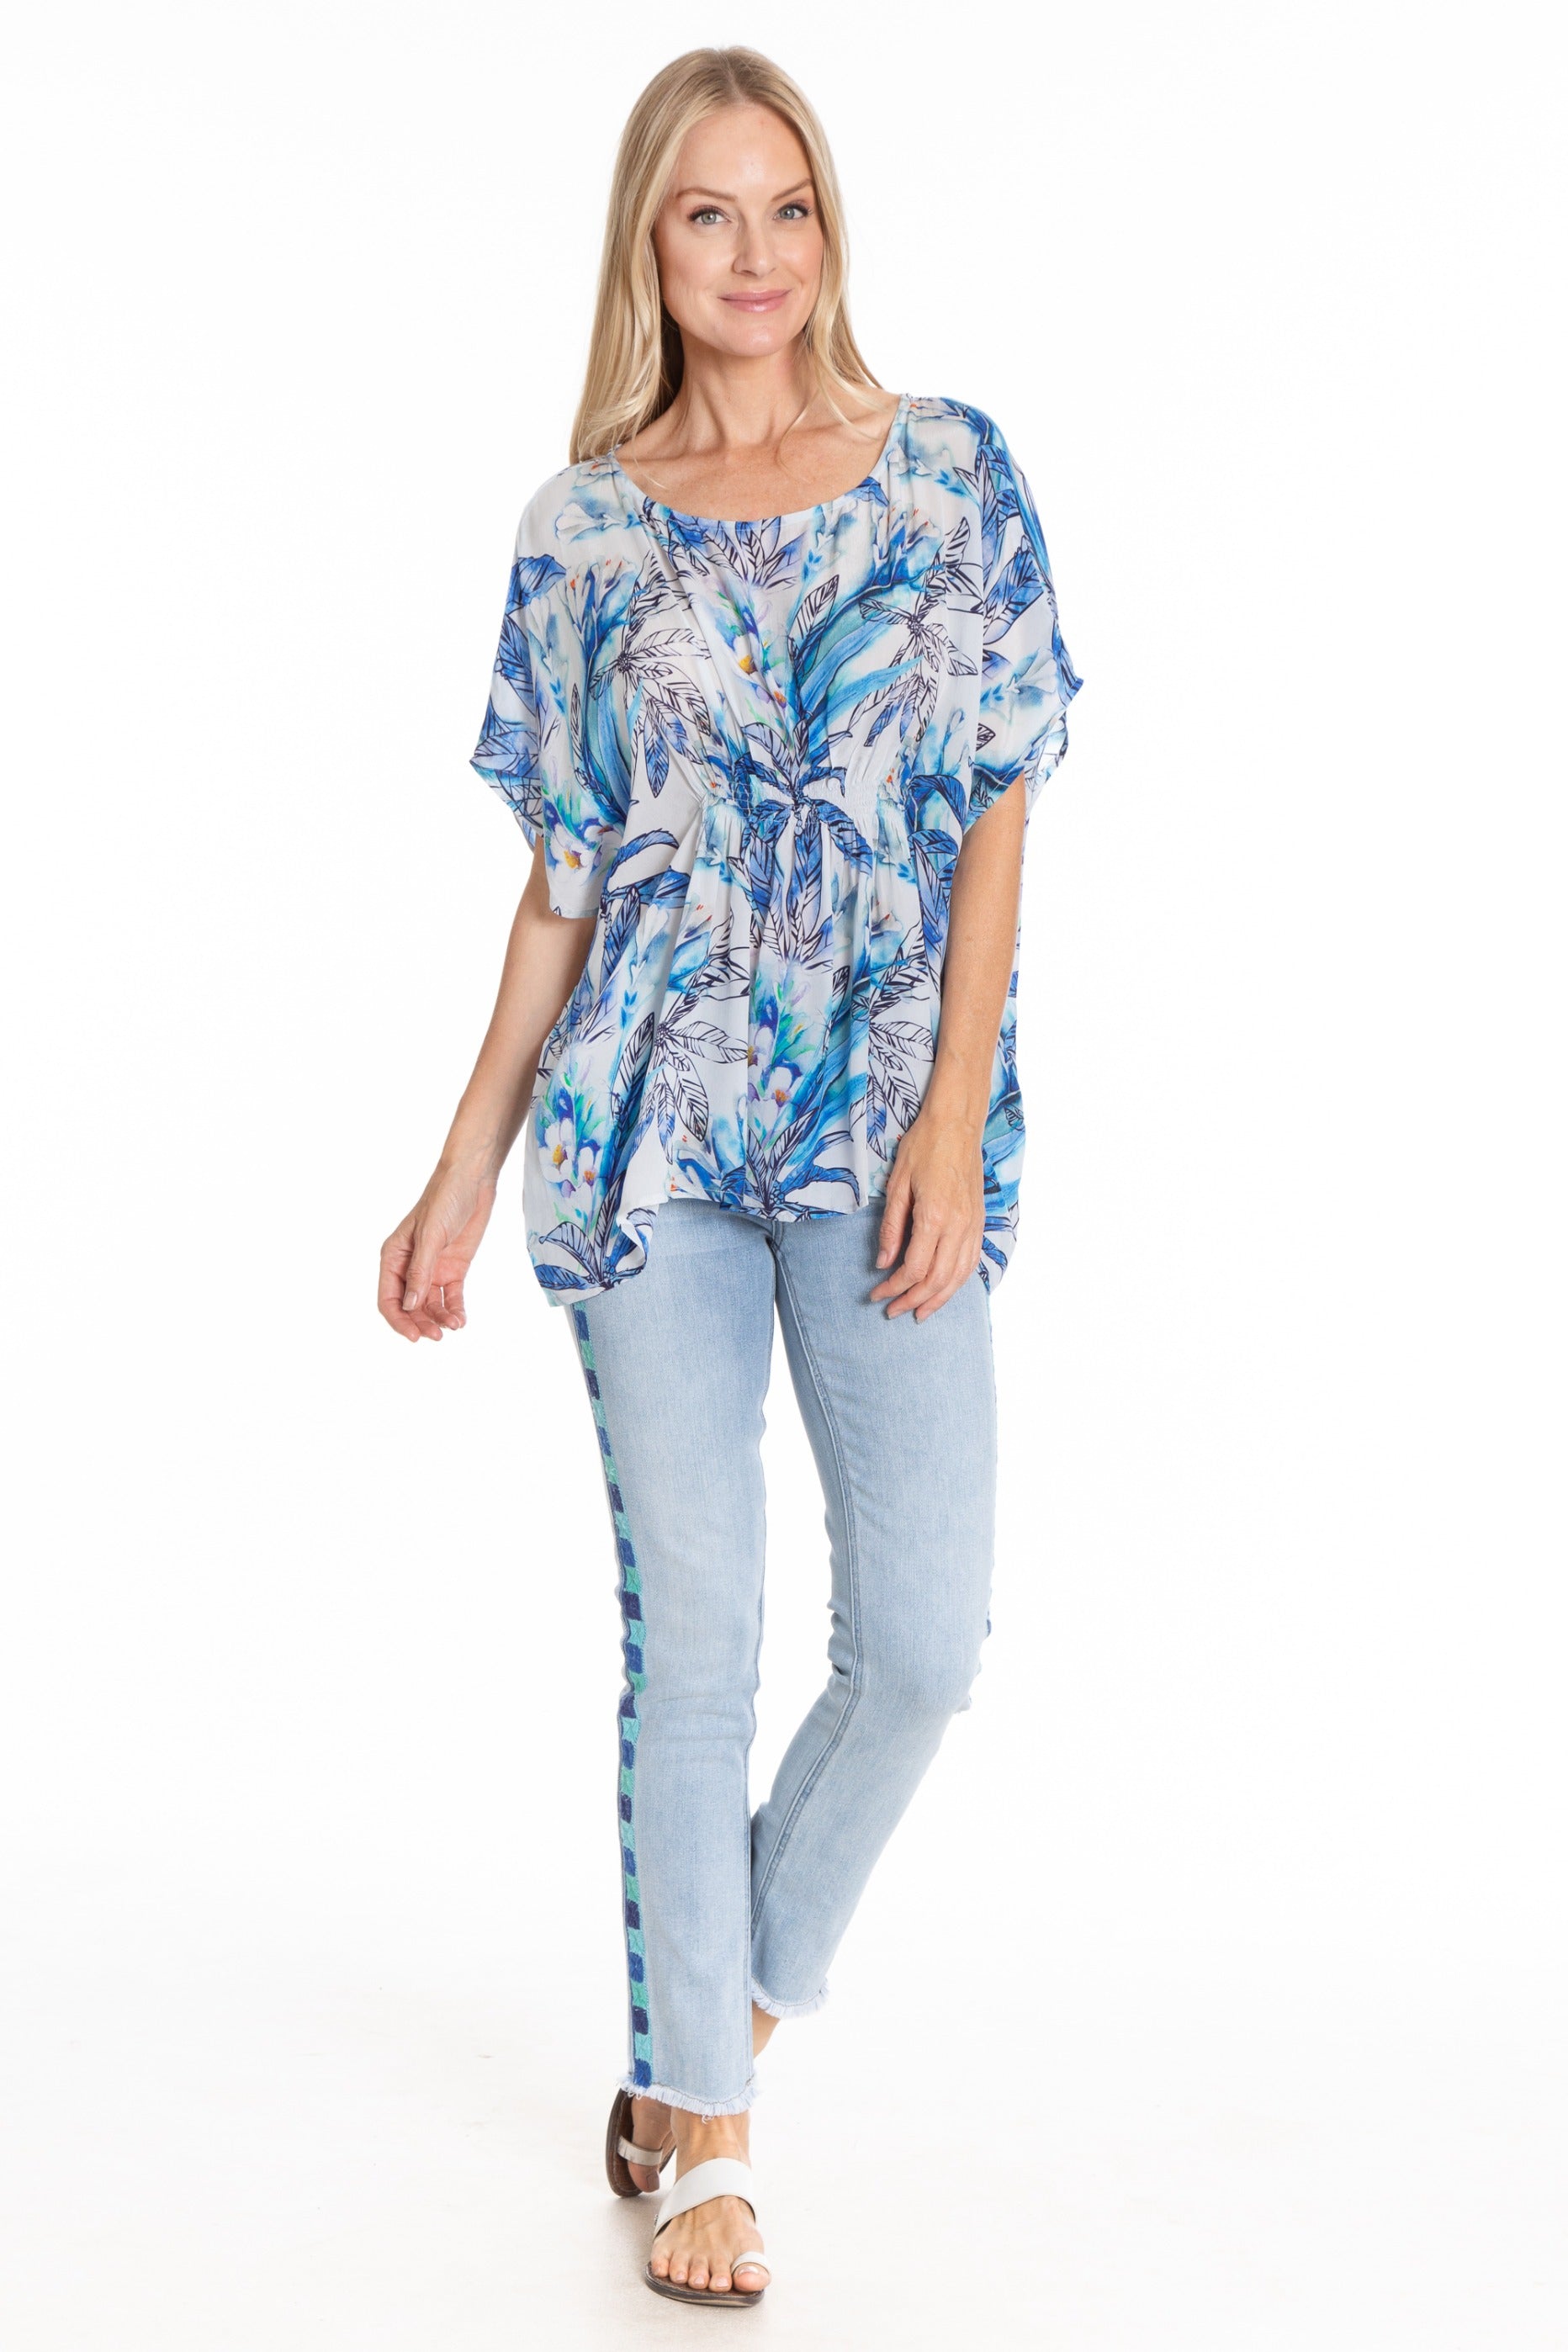 Island Paradise Print - Pullover Poncho with Ruching Top Full-1 APNY